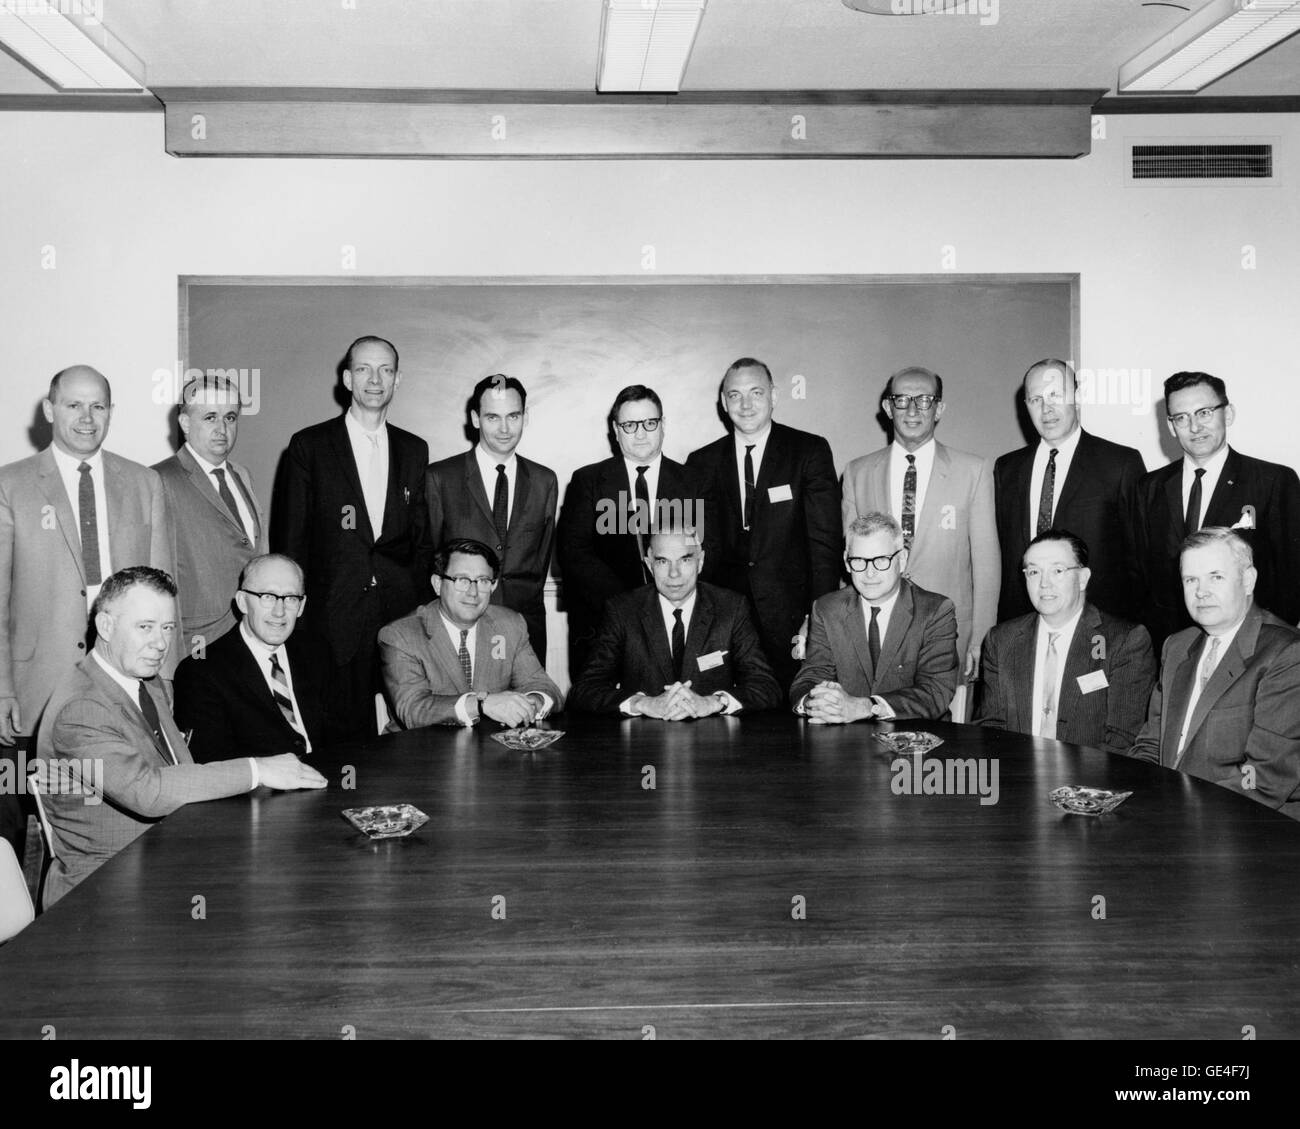 Atomic Energy Commission (AEC) officials with Abe Silverstein (front row, sitting third from left), working out the final reactor licensing issues. It is said that Silverstein told AEC Director Glenn Seaborg that the officials could not leave until a deal was struck. Because Plum Brook was a federal acility, it was not required to file for an AEC license, but to promote peace of mind in the nearby community and maintain safety, NASA officials decided to work through the commission. They received the AEC designation Test Reactor 3 (TR-3).  Image # : C-1964-69271 Stock Photo